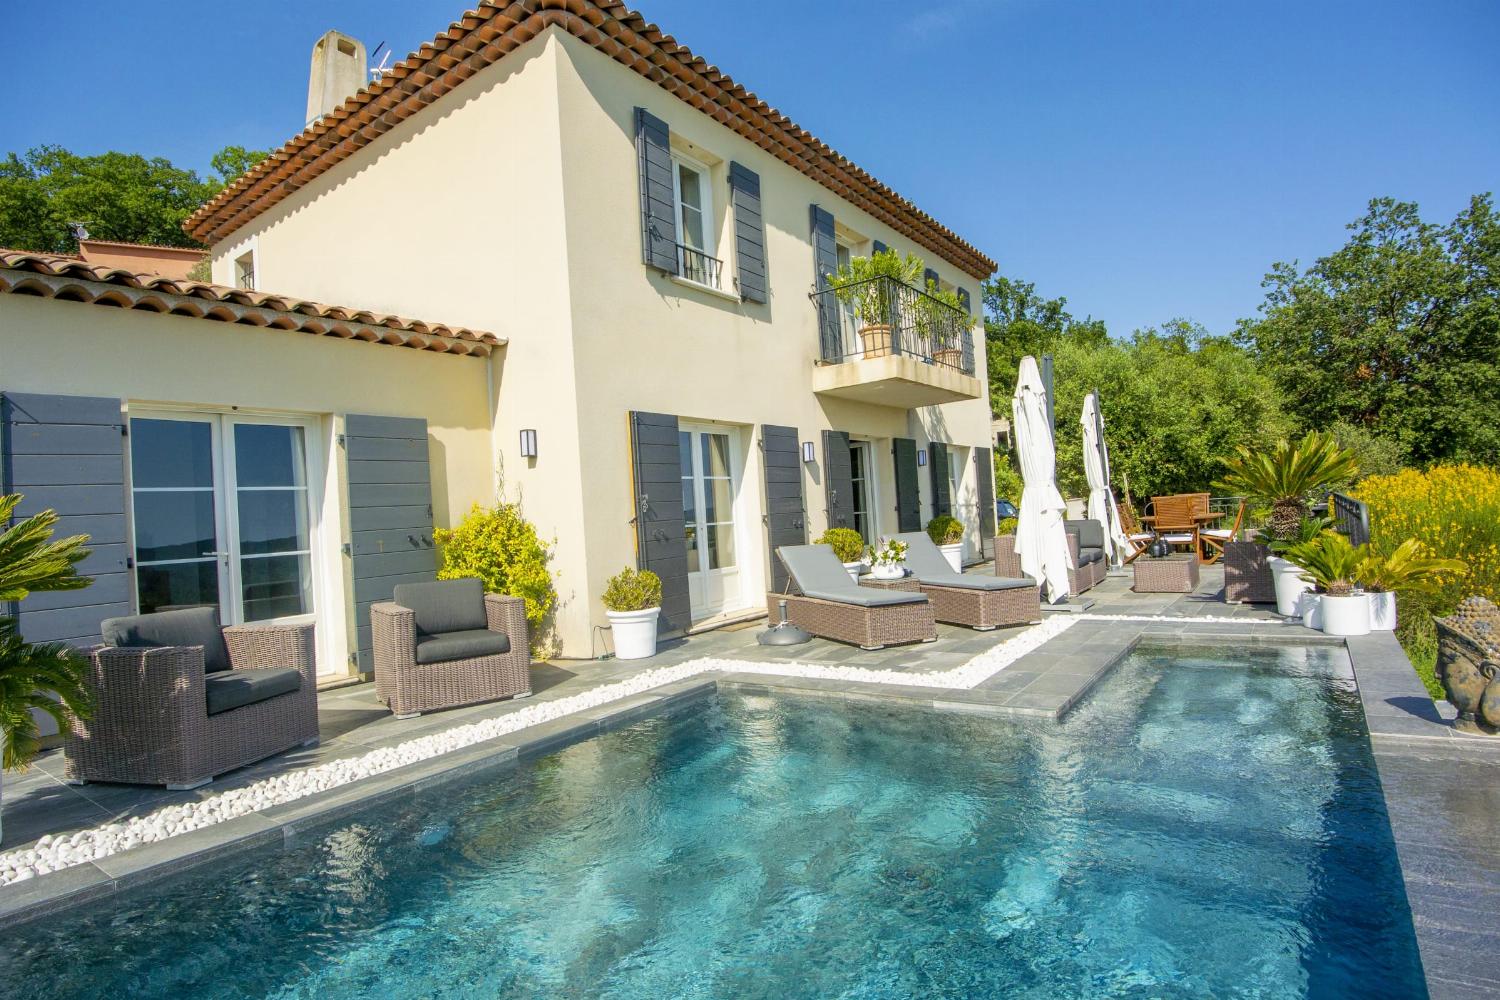 Holiday villa in Provence with private infinity pool